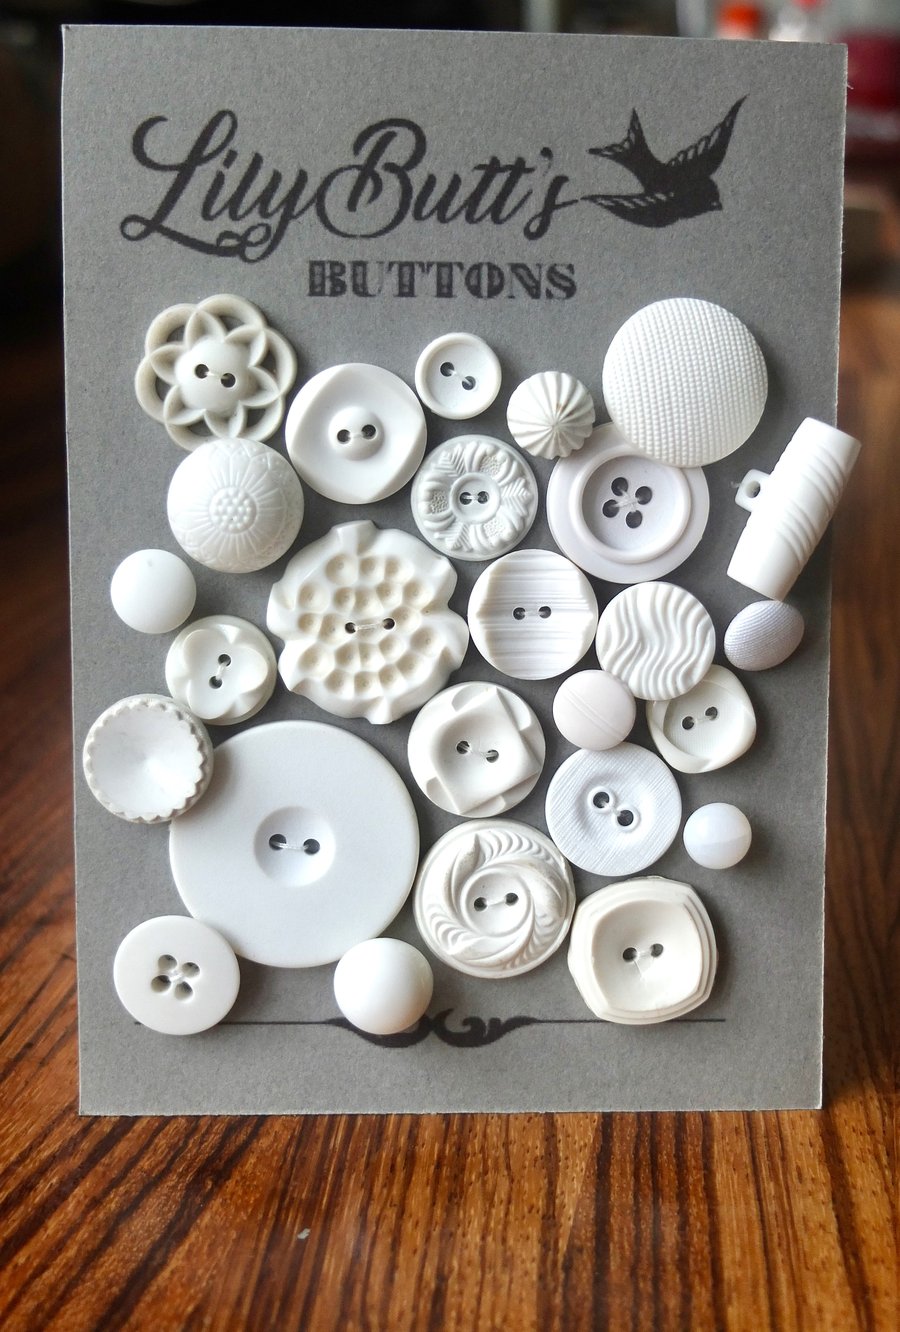 26 Vintage Mixed White Buttons